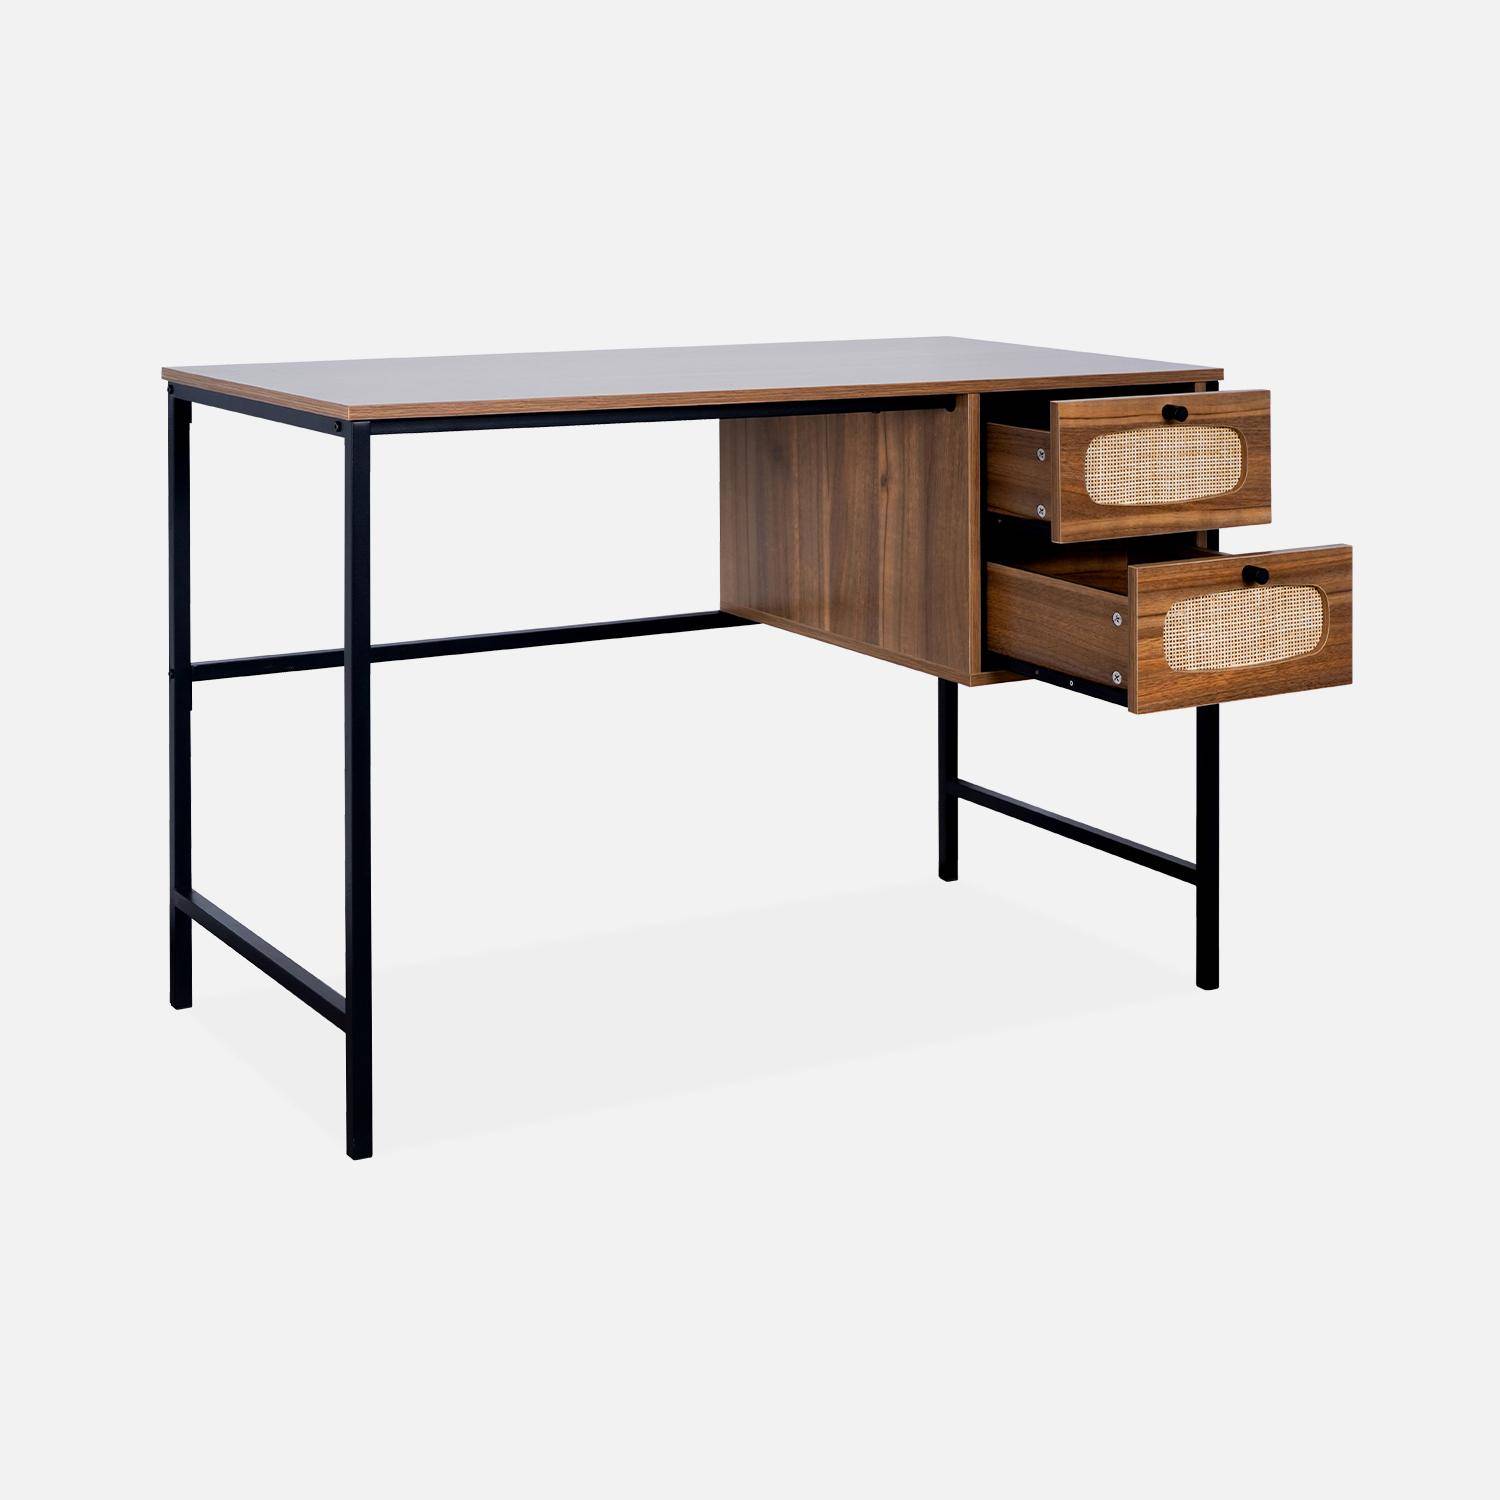 Retro wood and cane desk with black metal legs and handles Photo5